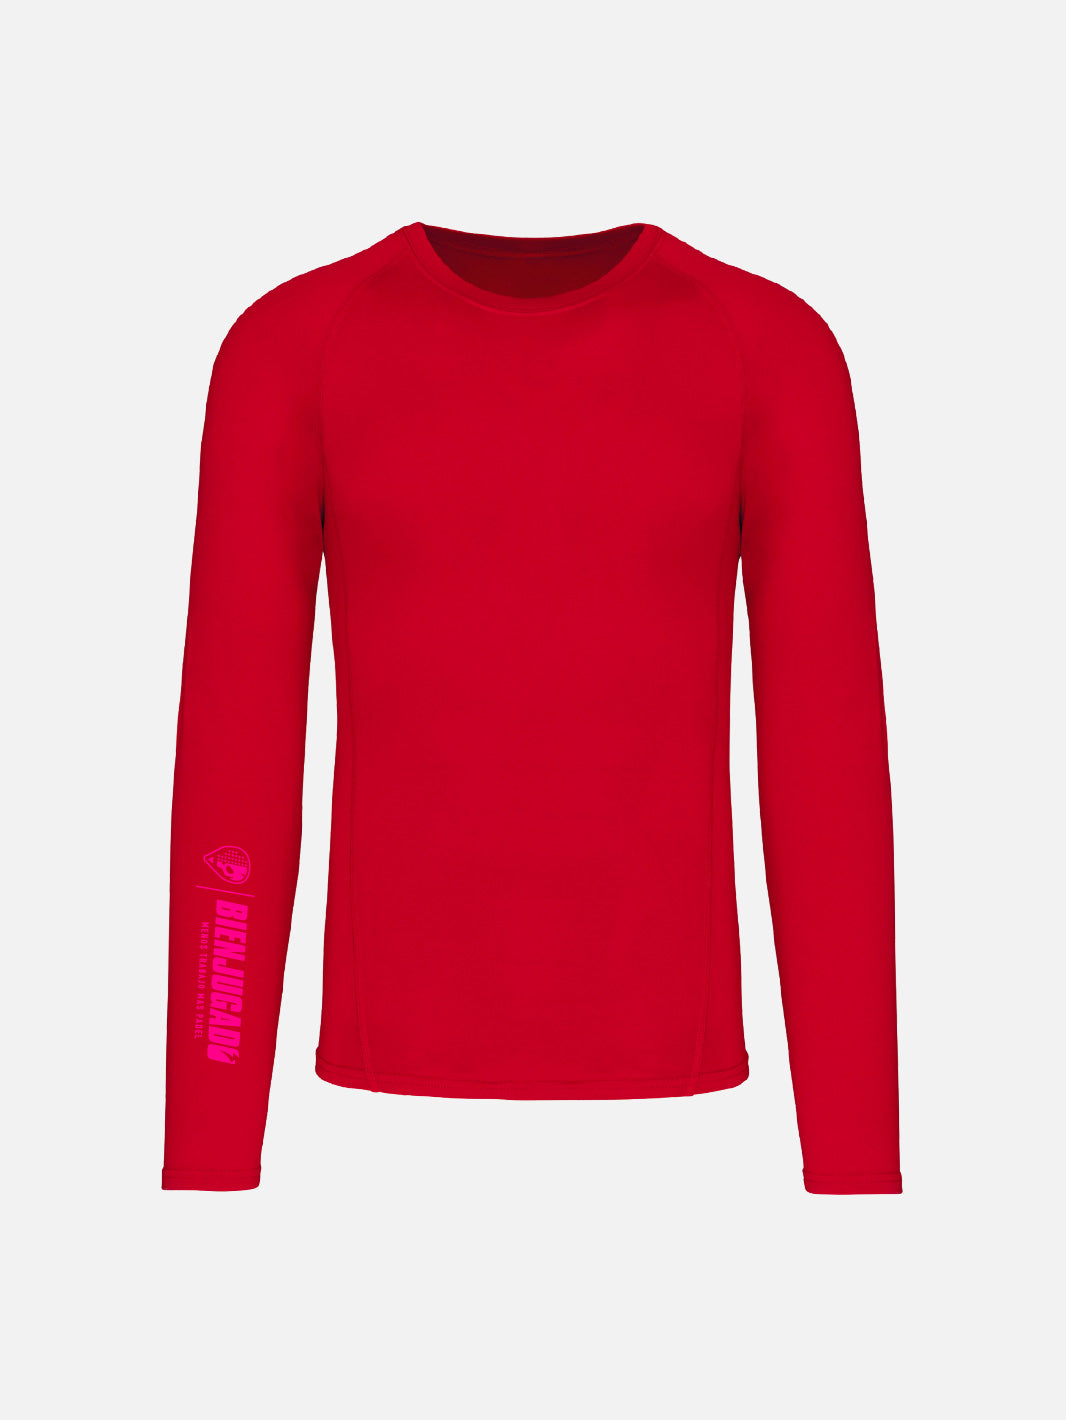 Unisex Thermal Shirt - Red